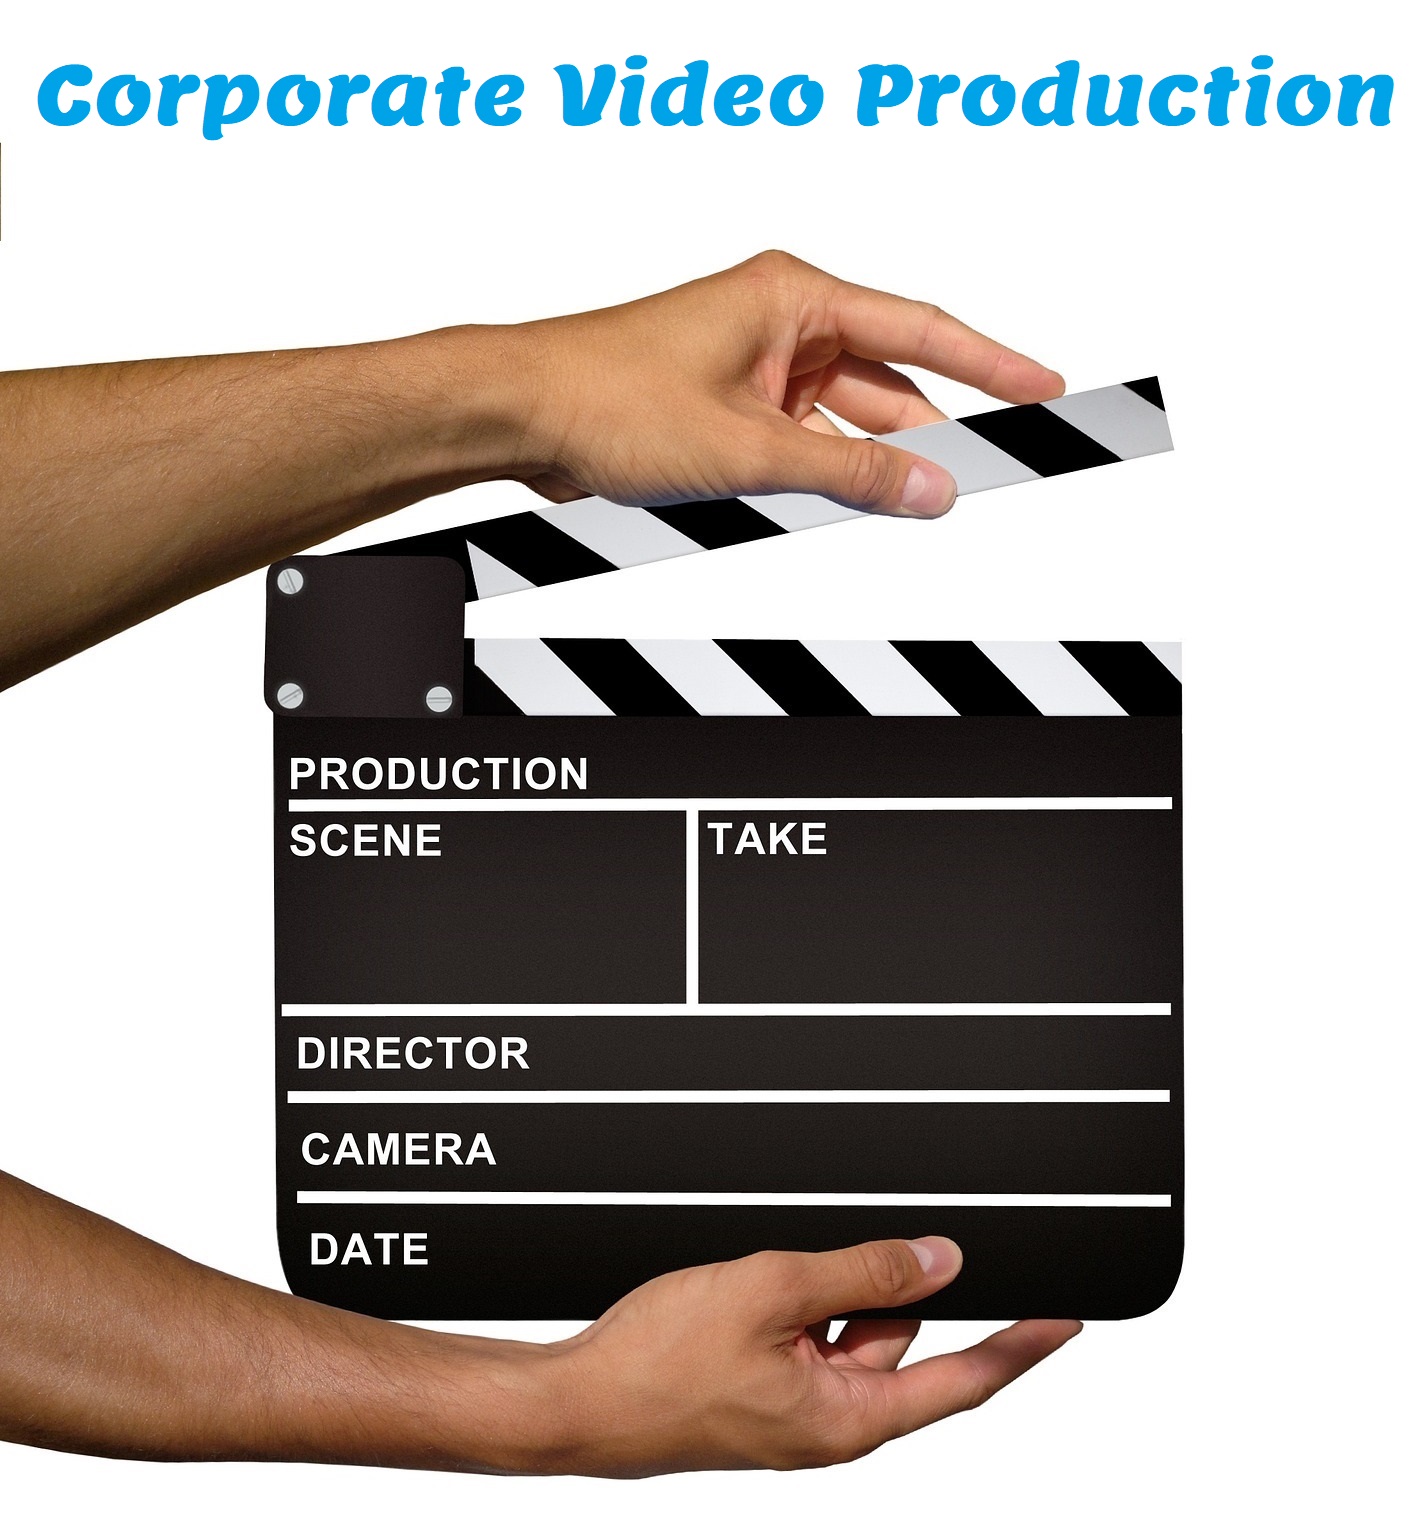 Corporate Video Production | Corporate Video Production UK